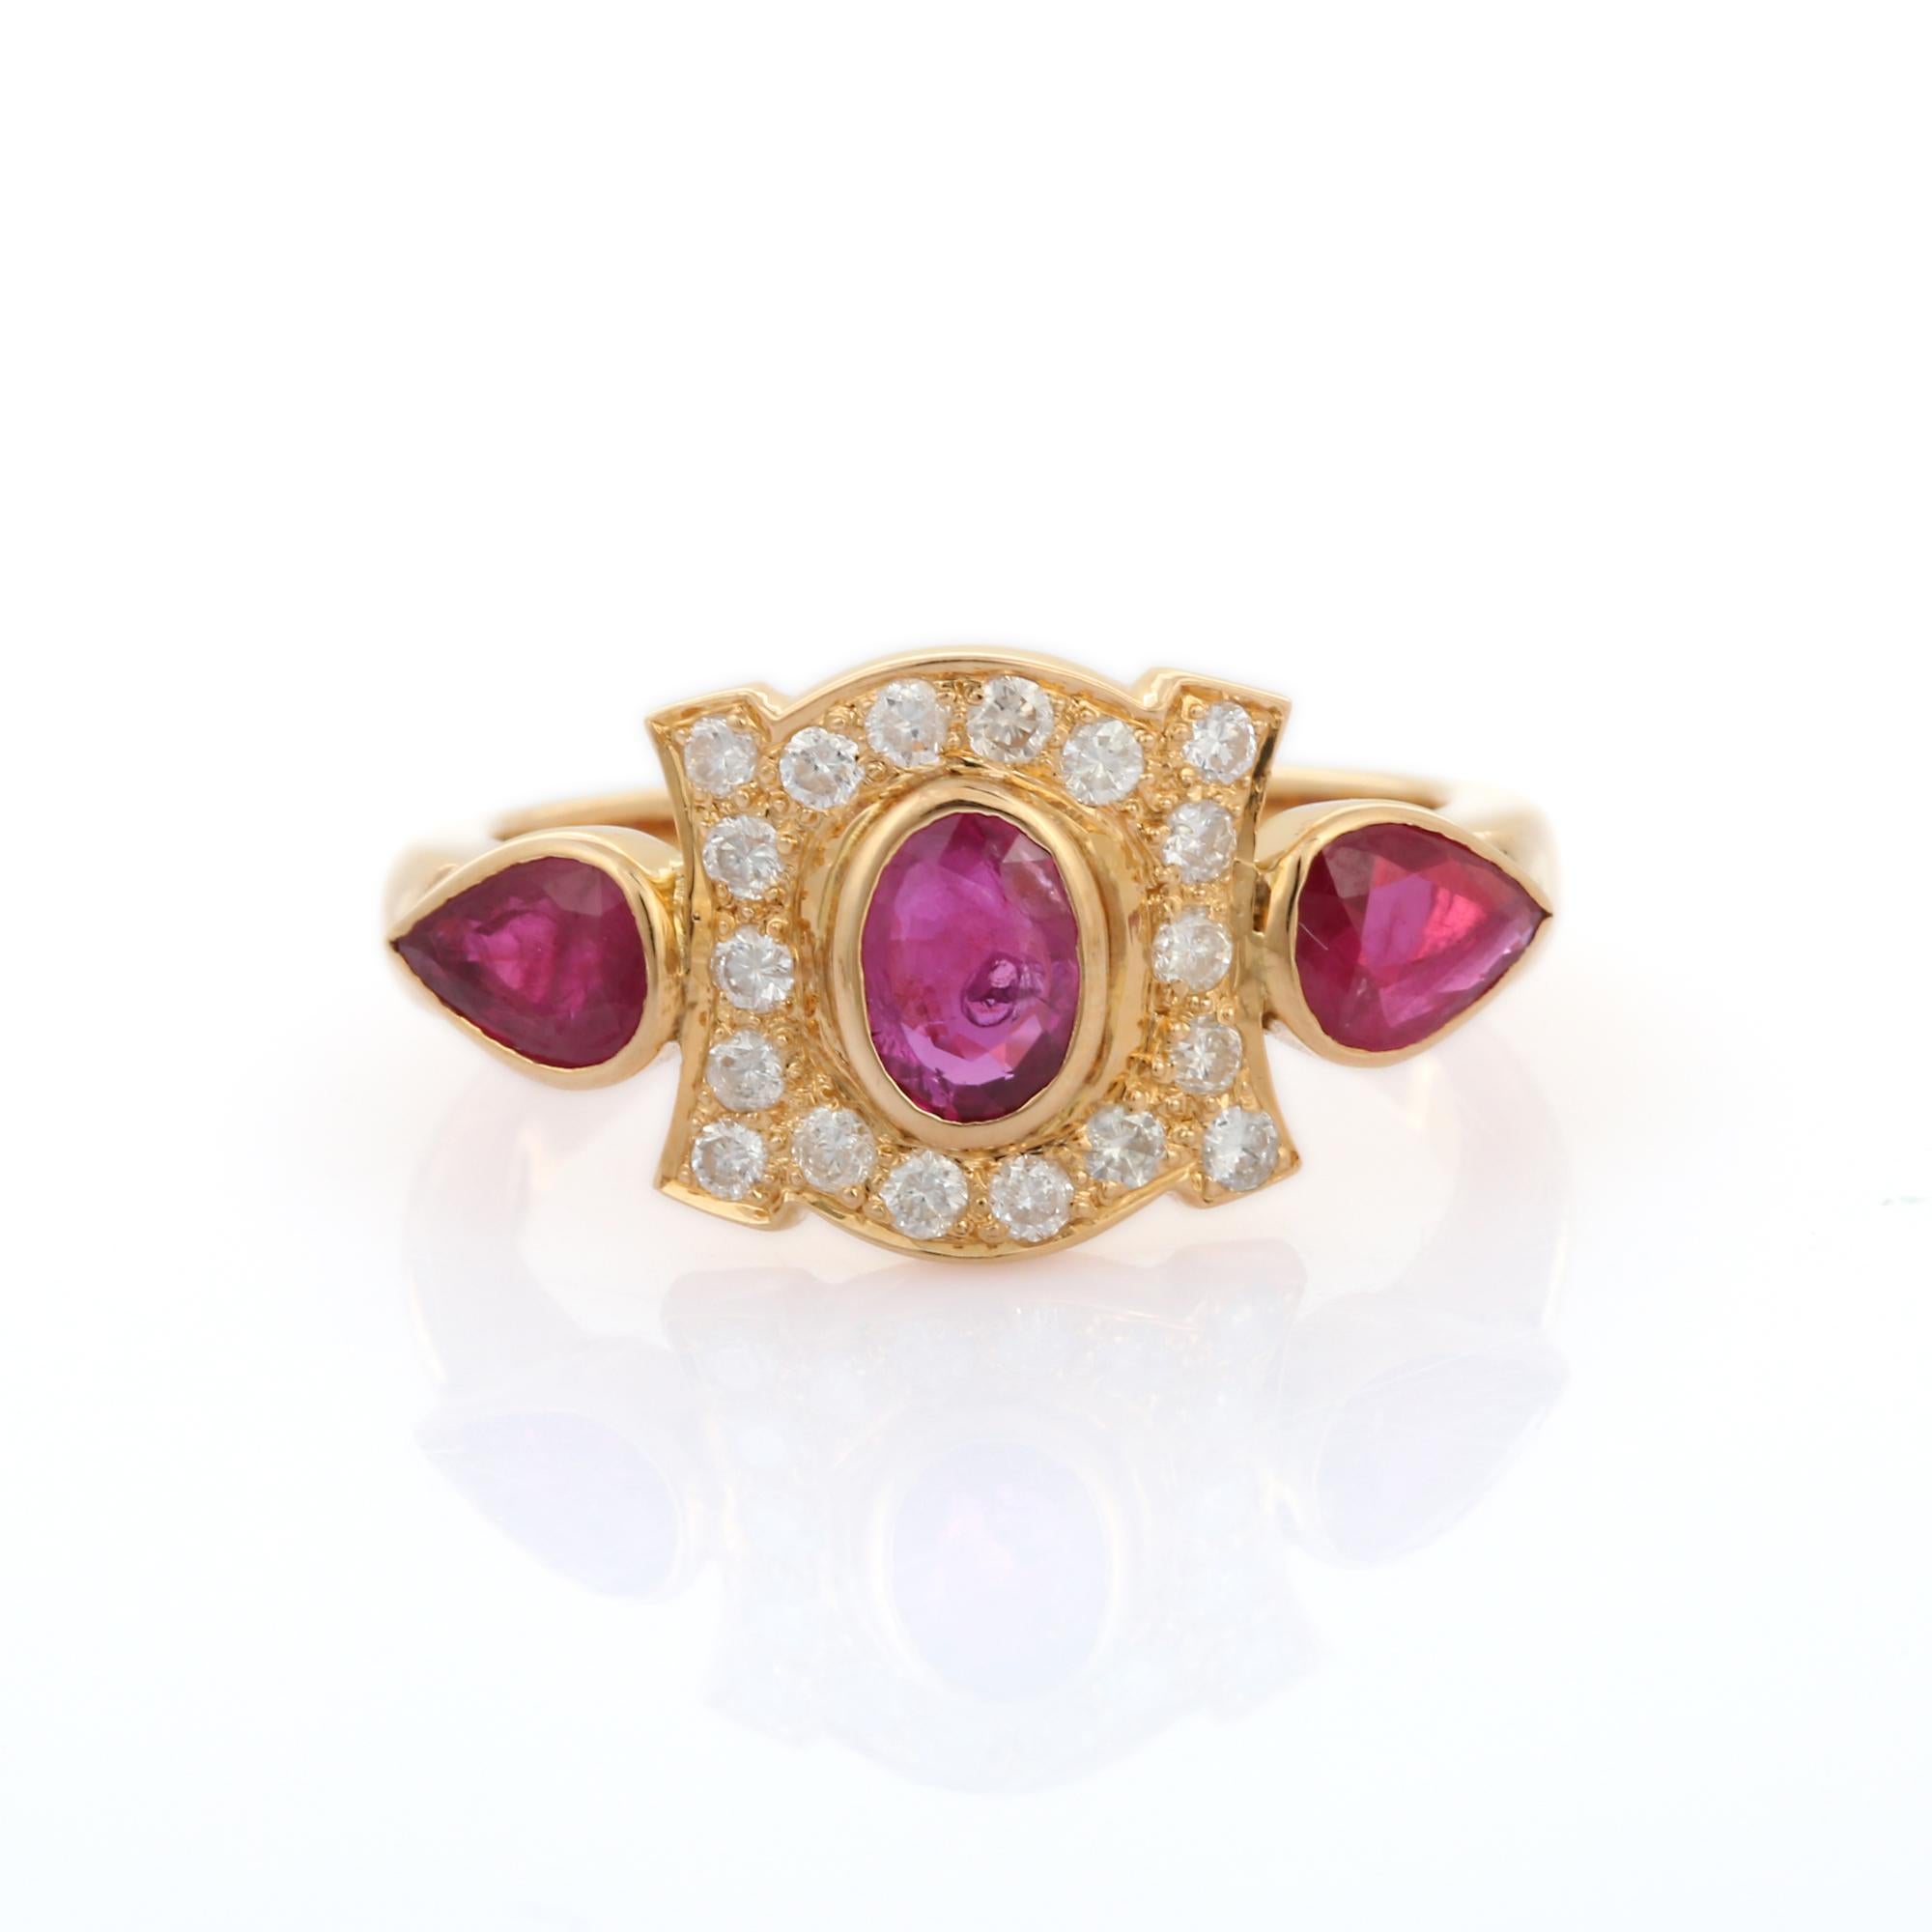 For Sale:  18K Yellow Gold Ruby Three Stone Ring with Diamonds Wedding Gemstone Ring 7